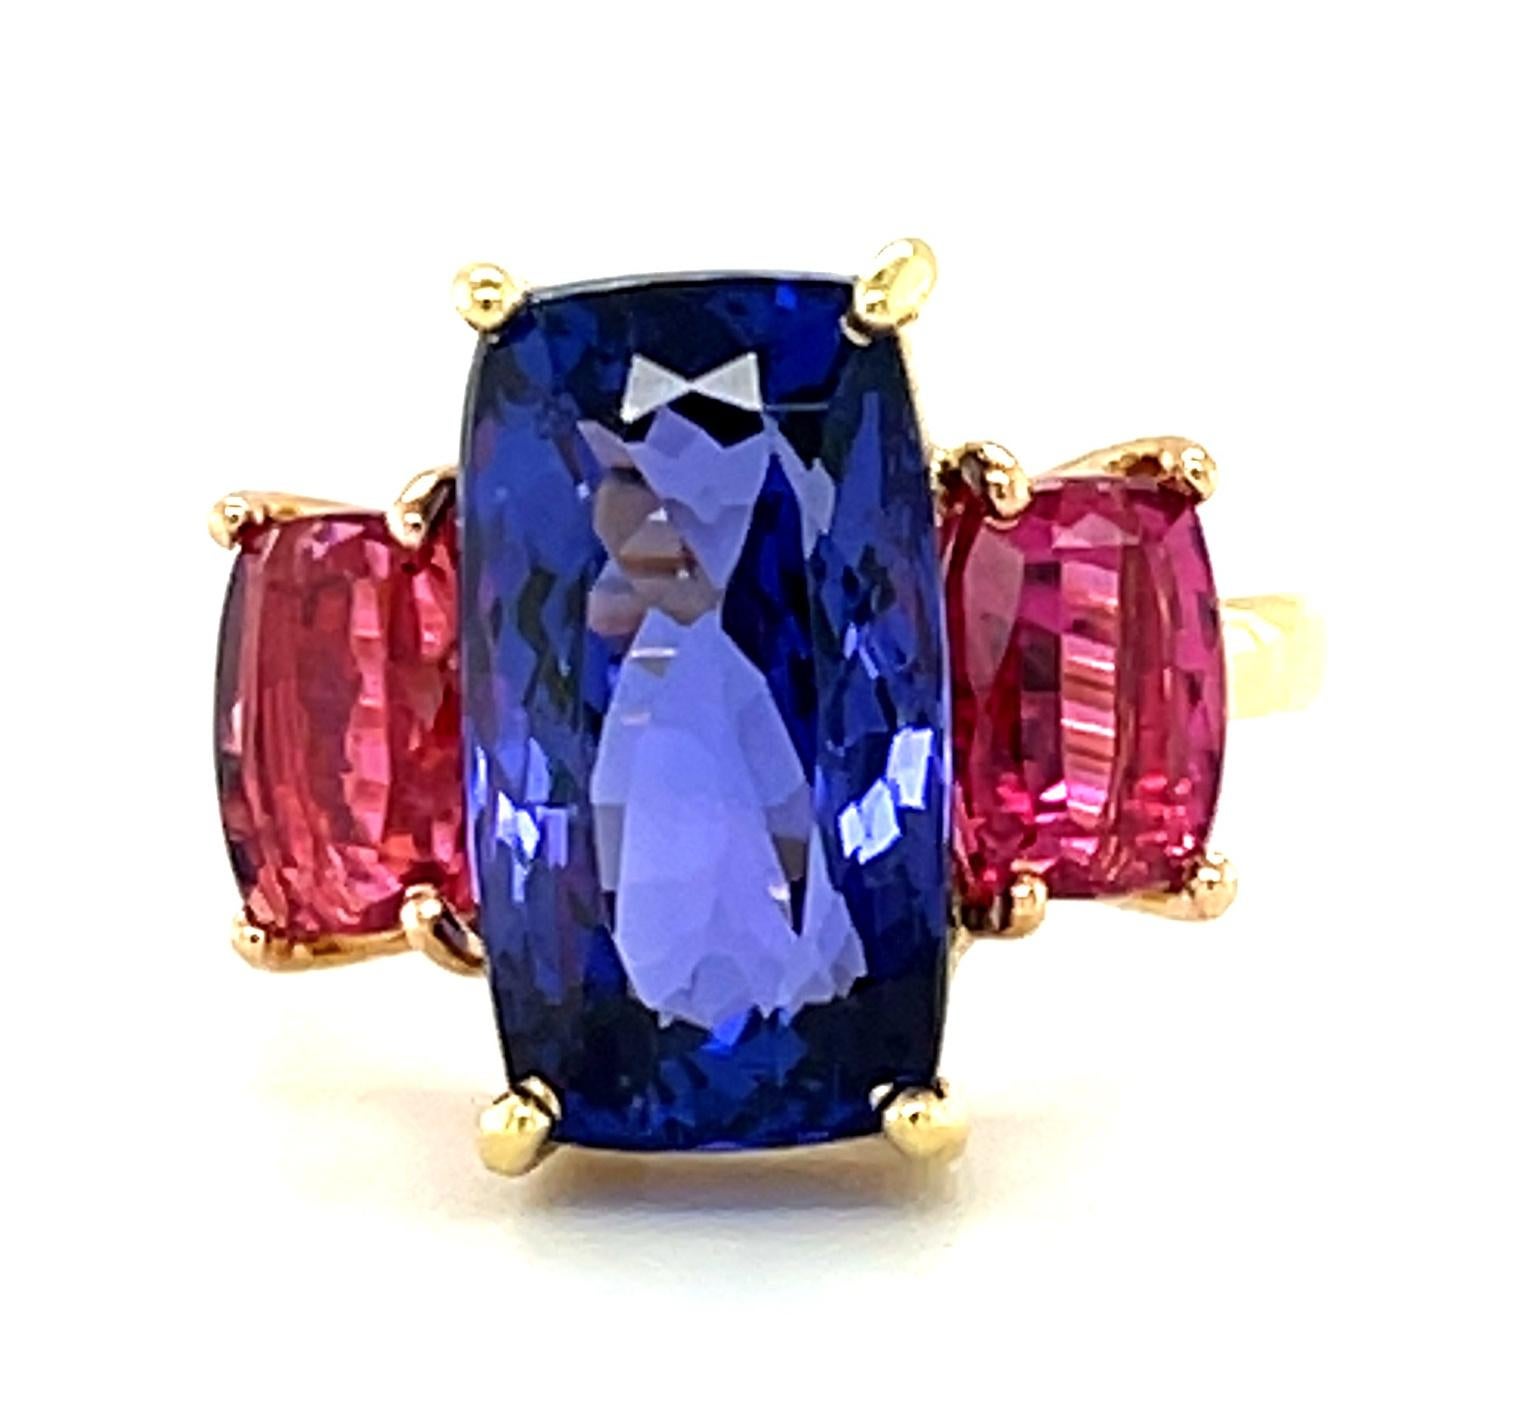 Gemstones in beautiful, vibrant colors and custom shapes are what this modern version of the classic, 3-stone ring is all about! It features an elongated cushion cut tanzanite in a beautiful, deep, periwinkle color and a matched pair of deep fuchsia